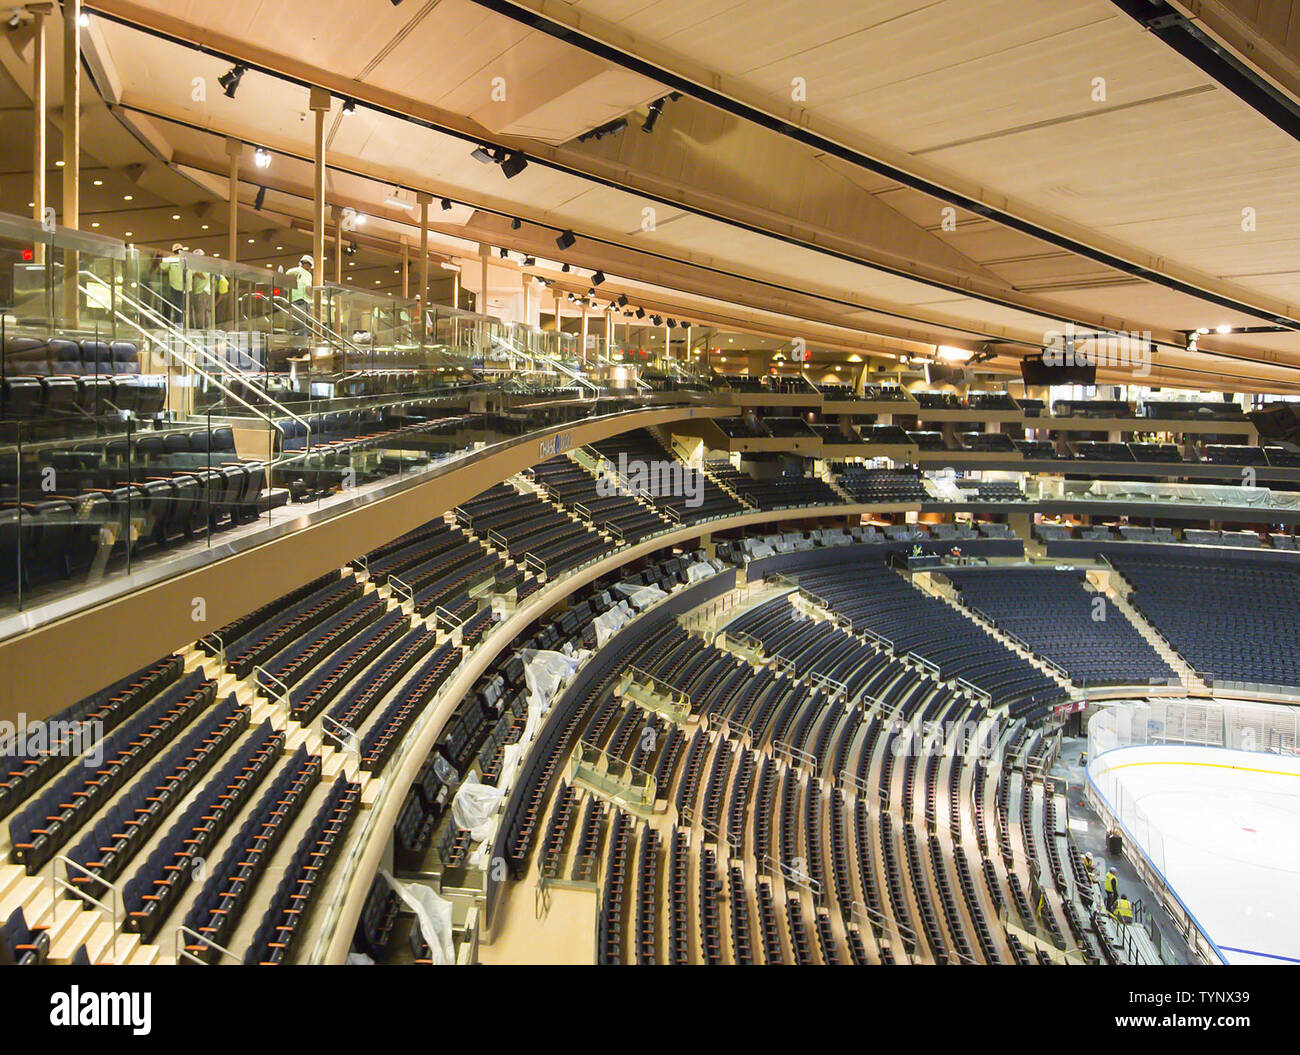 The Chase Bridges are fully installed at Madison Square Garden for the reopening of the arena after 3 years of on and off construction in New York City on October 16, 2013.  These photos show two revolutionary glass-walled seating bridges attached to the roof that hold 430 seats, each going for $110 to $210. The Garden has been shutting down for four to five months every year for the past three years to finish the billion-dollar renovation, which also includes wider concourses, mores suites and comfortable new balcony seating.     UPI/Rebecca Taylor/MSG Photos Stock Photo